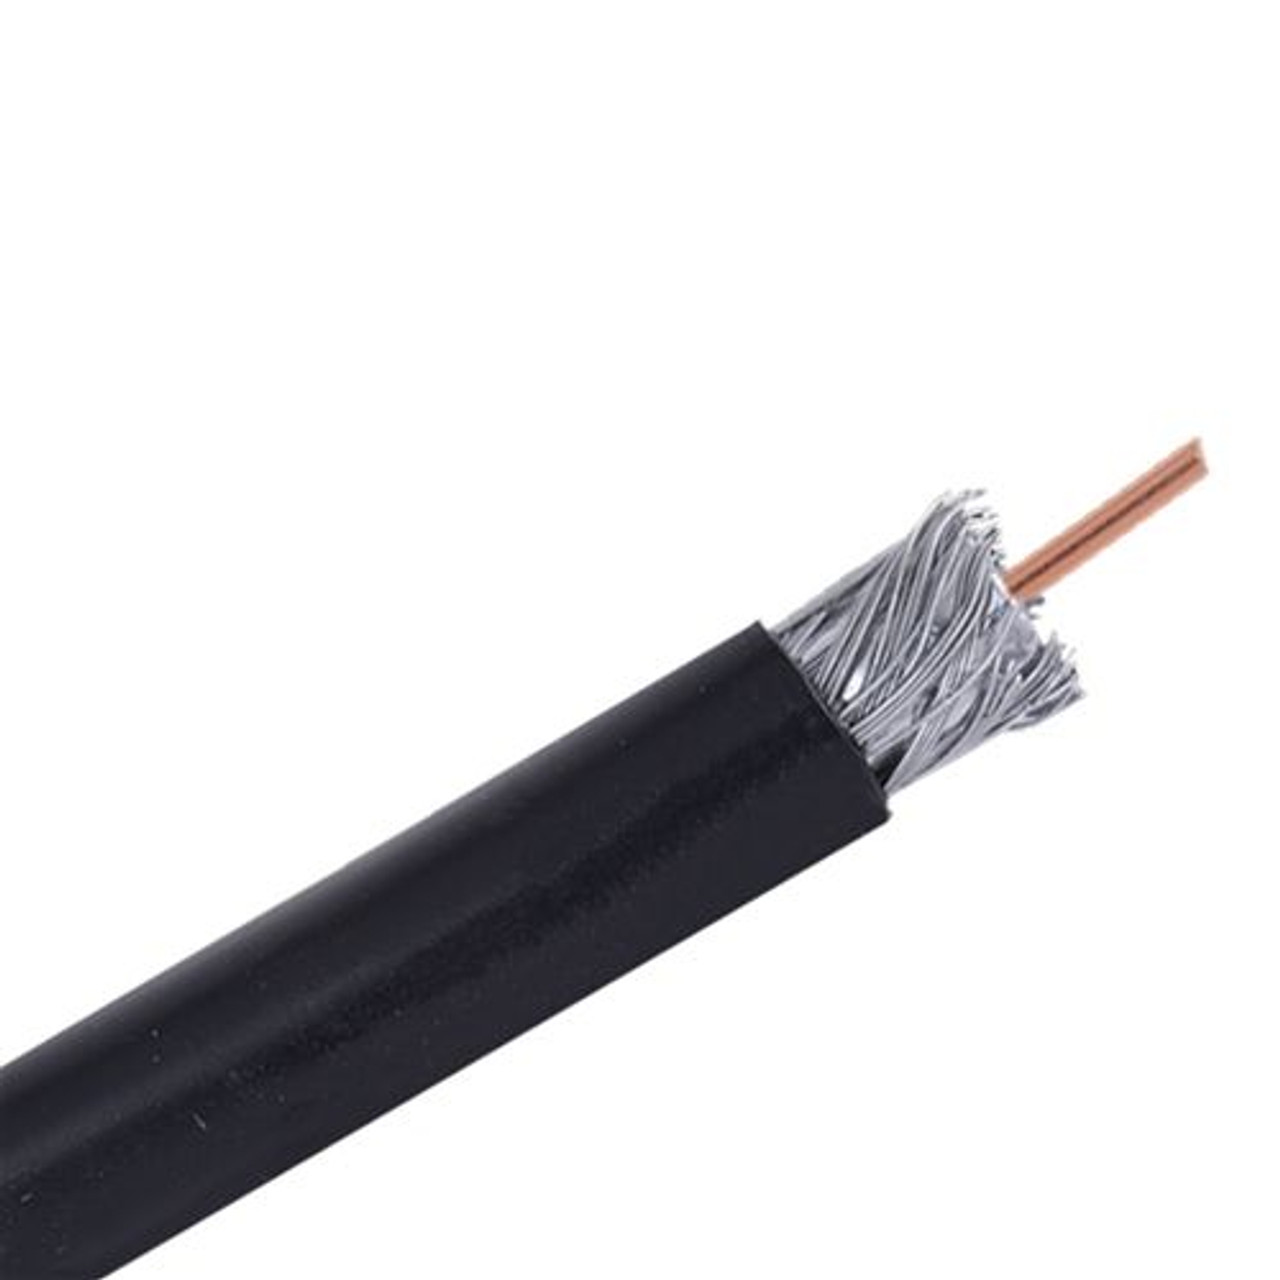 EAGLE RG6 Dual Shield Coaxial Cable Direct Burial Outdoor Black 3 GHz 18 AWG CCS 100 FT, Part #CA6ODB